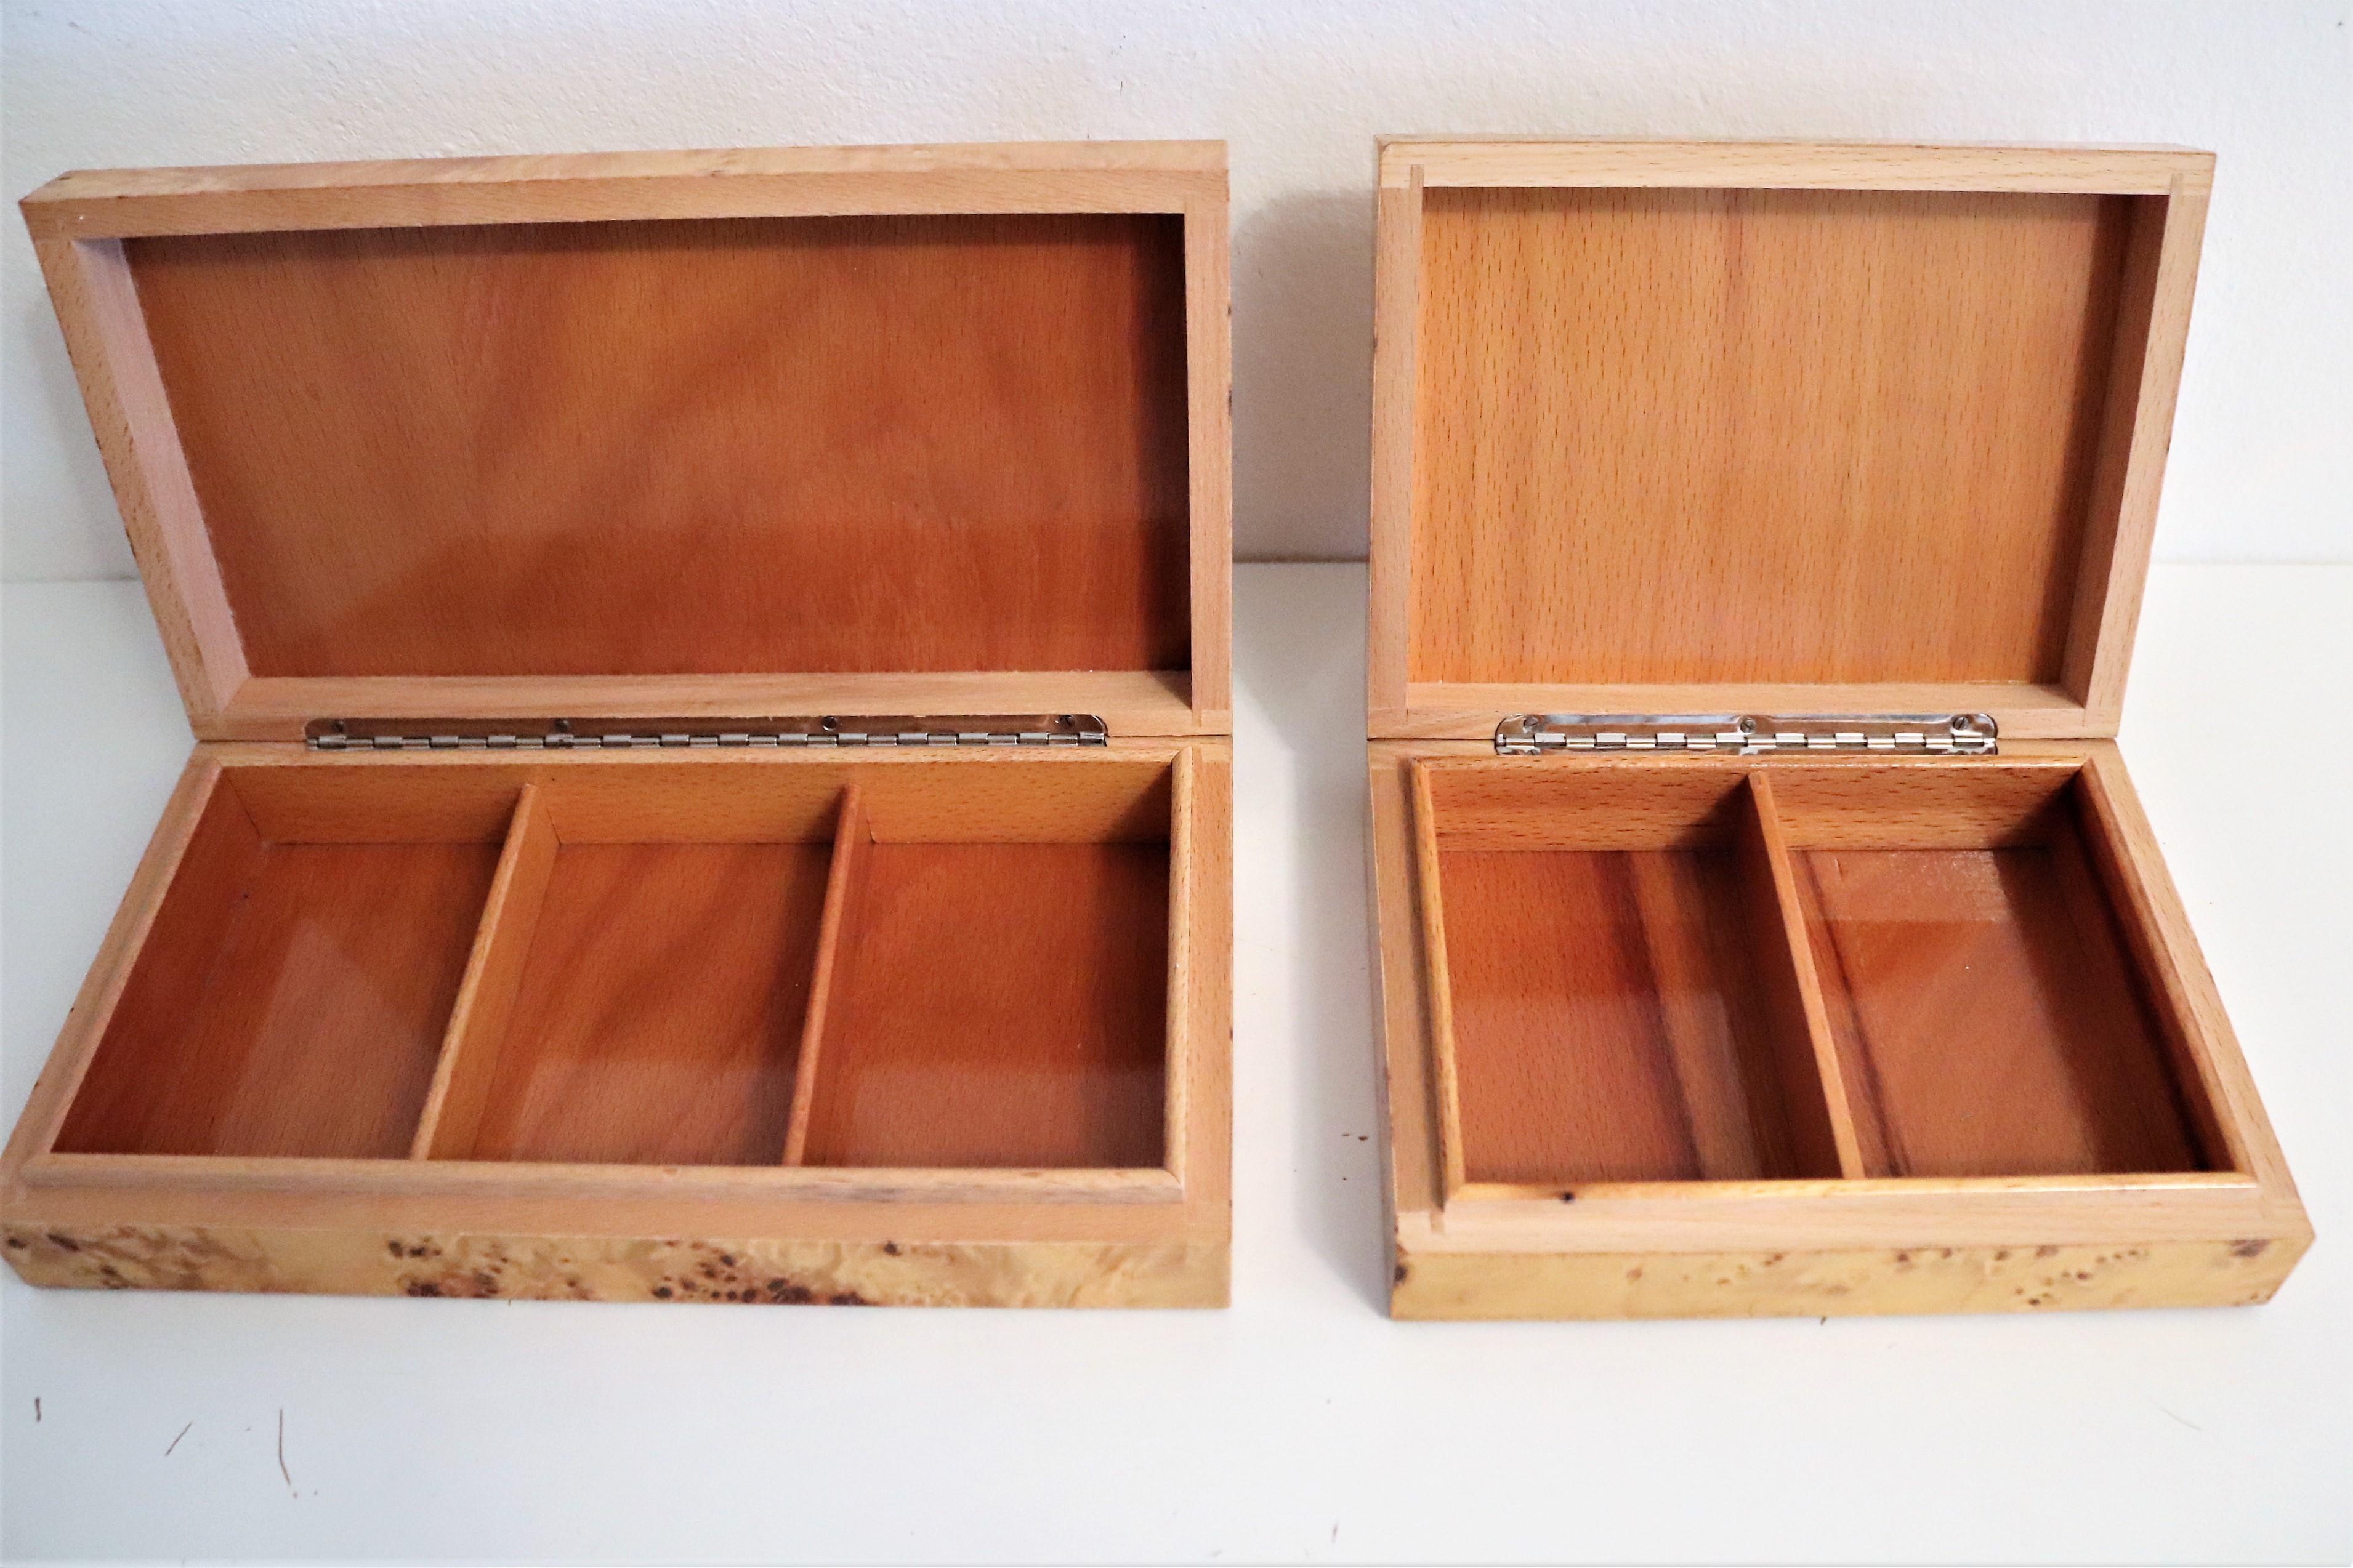 Beautiful set of two pieces of decorative boxes made of burl wood outside and beech-wood inside.
The smaller one still with original label.
Excellent craftsmanship.

Both boxes have a very stylish and timeless design and would make any lover of